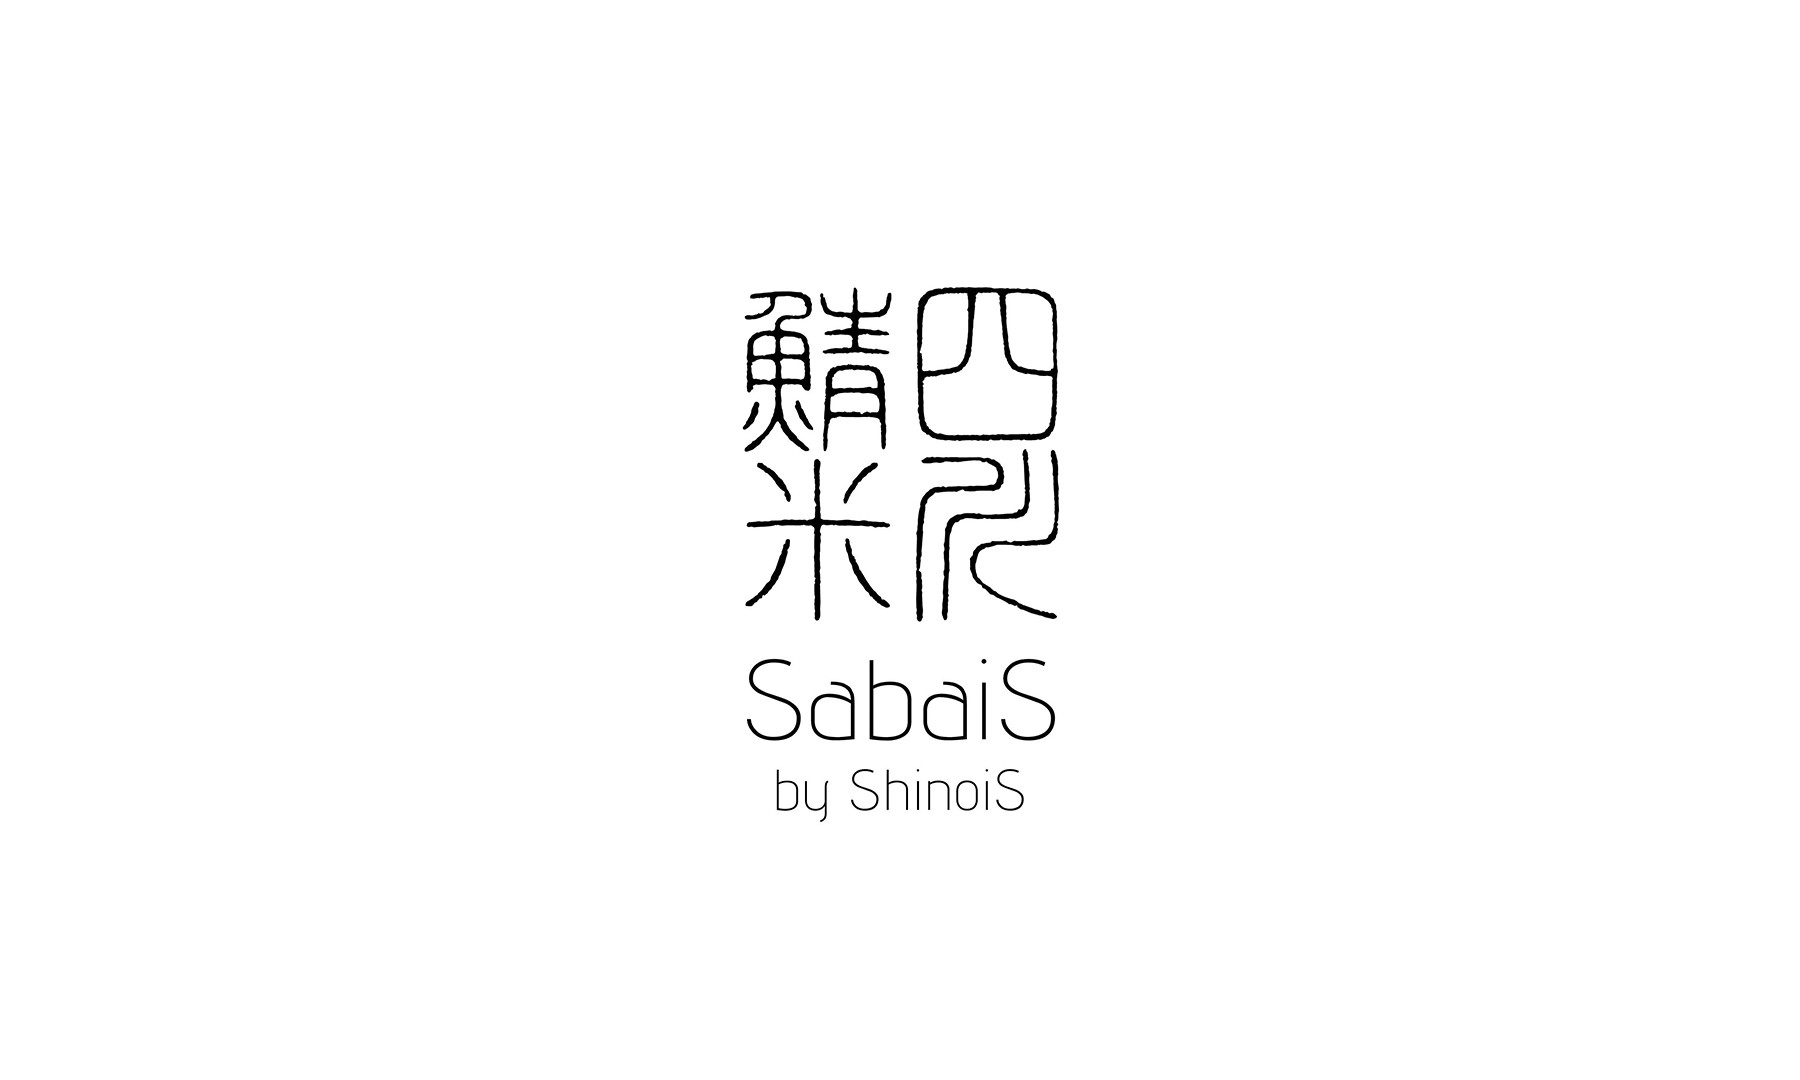 ShinoiS シノワ（Takeaway）'s images1